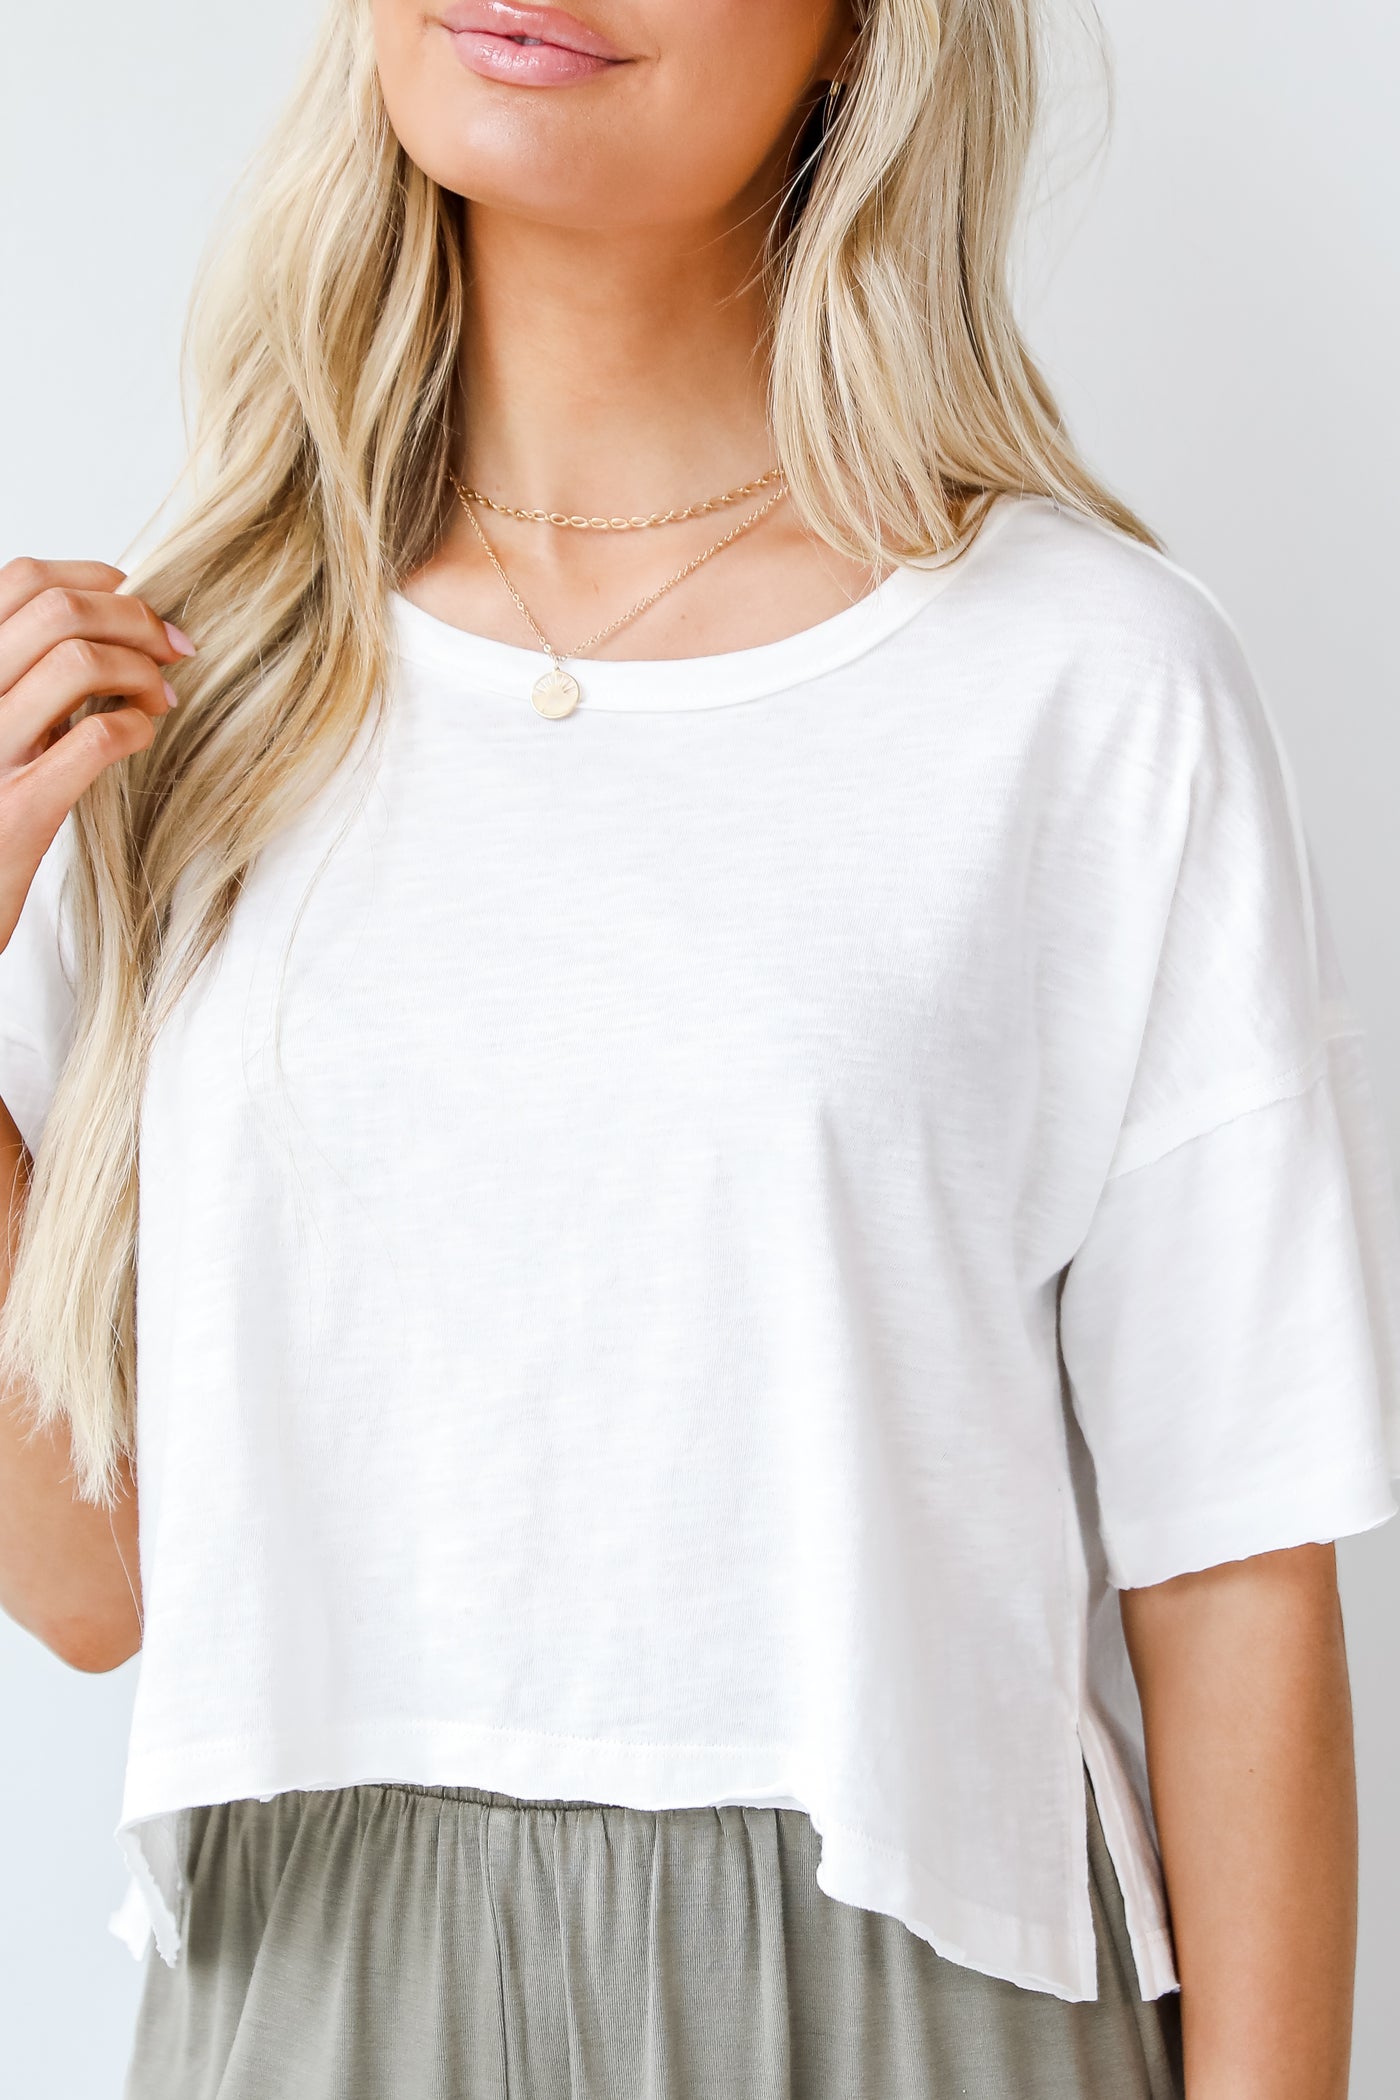 white Cropped Tee close up